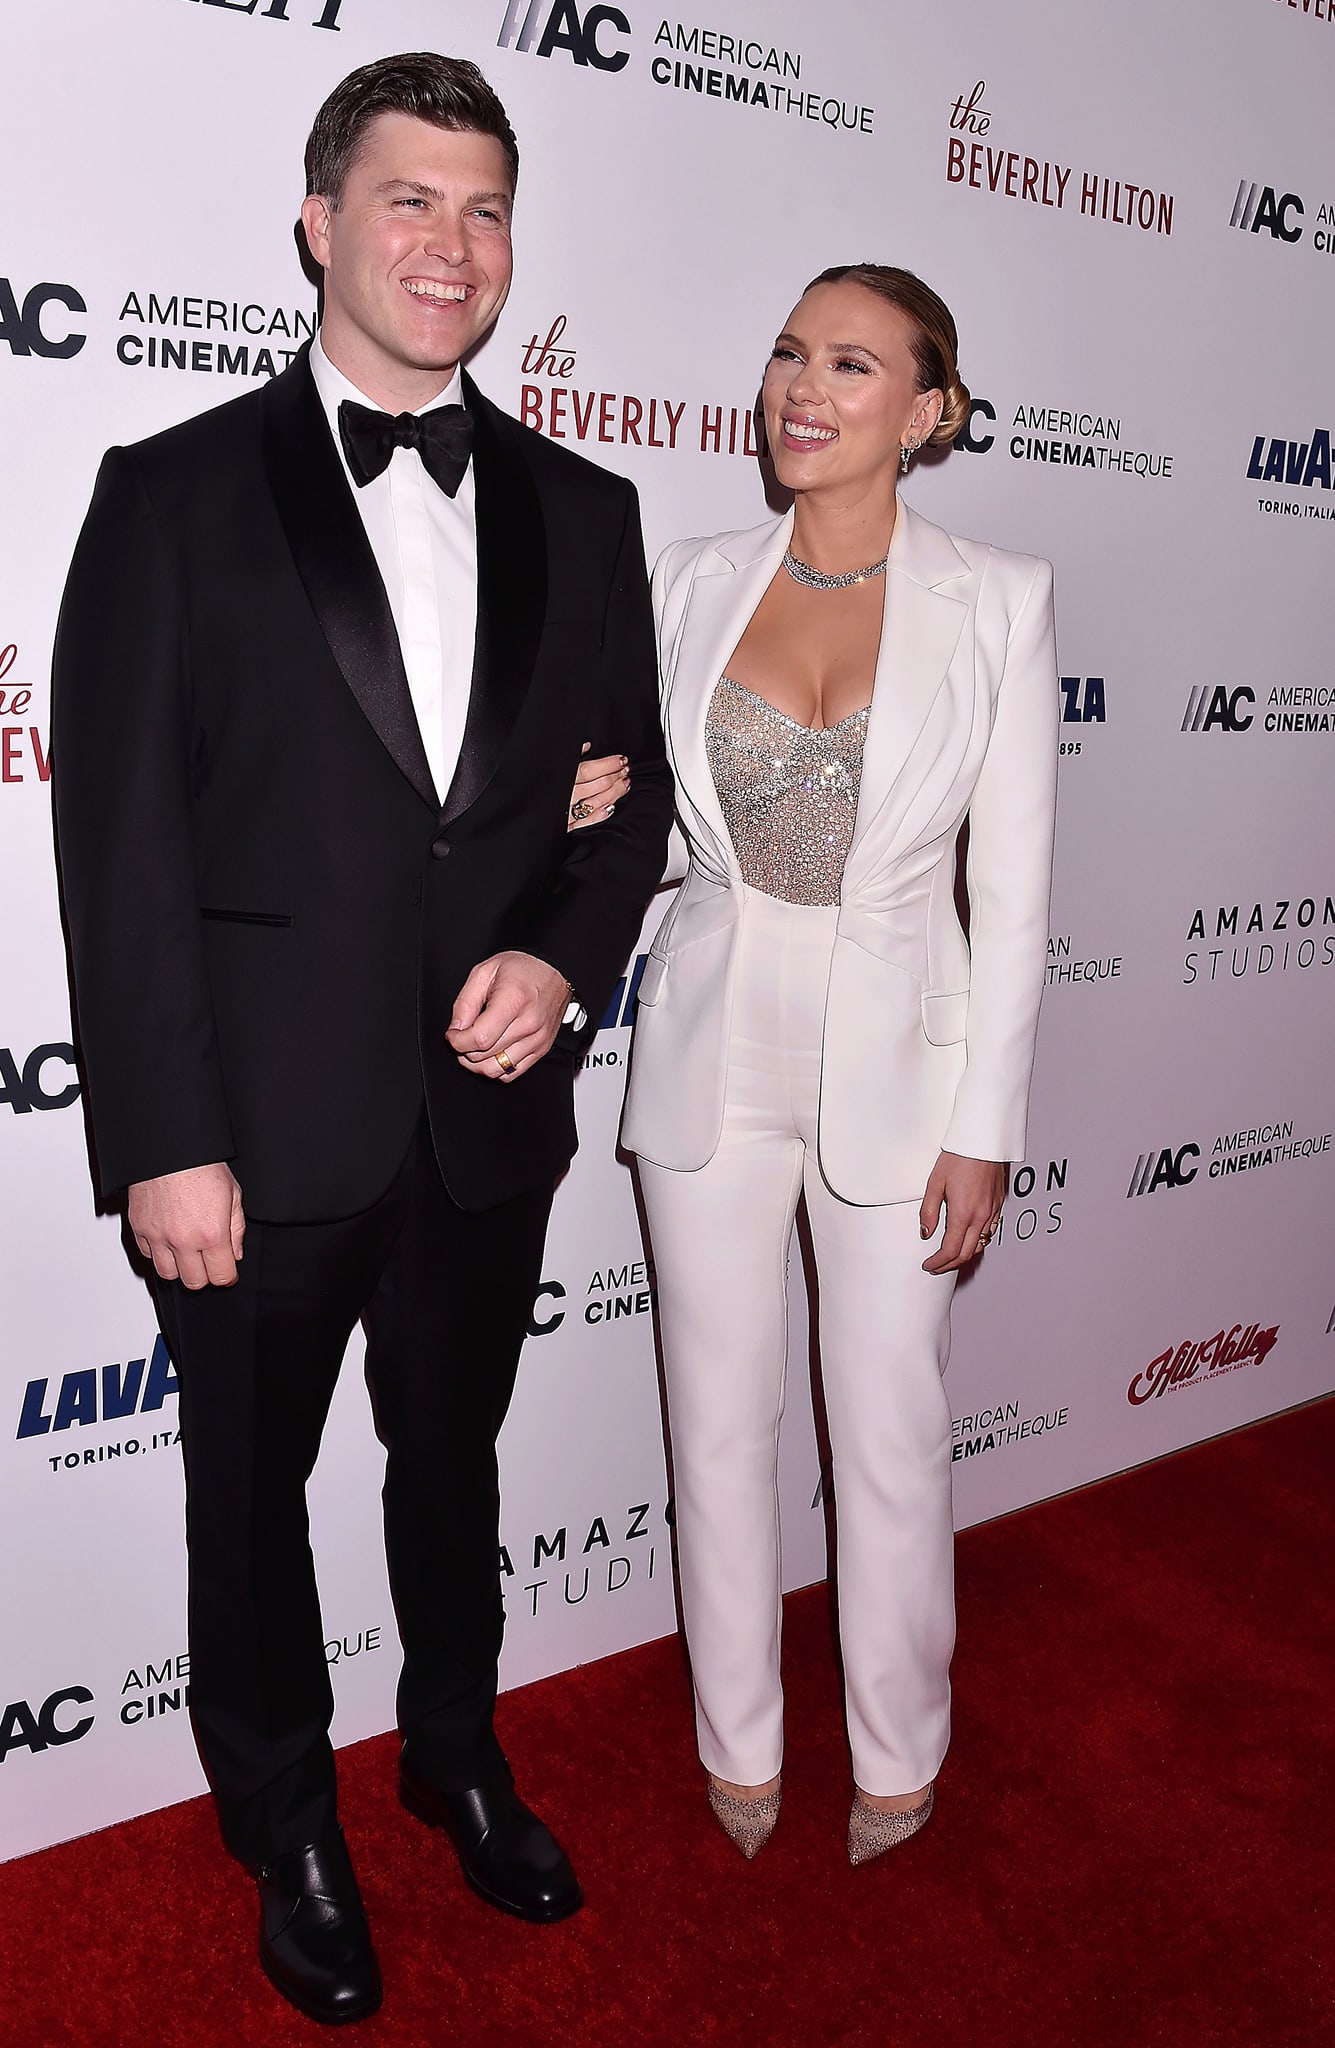 Tuxedo-clad Colin Jost accompanies wife Scarlett Johansson, who wows in a custom Versace white suit and crystal-embellished bustier top